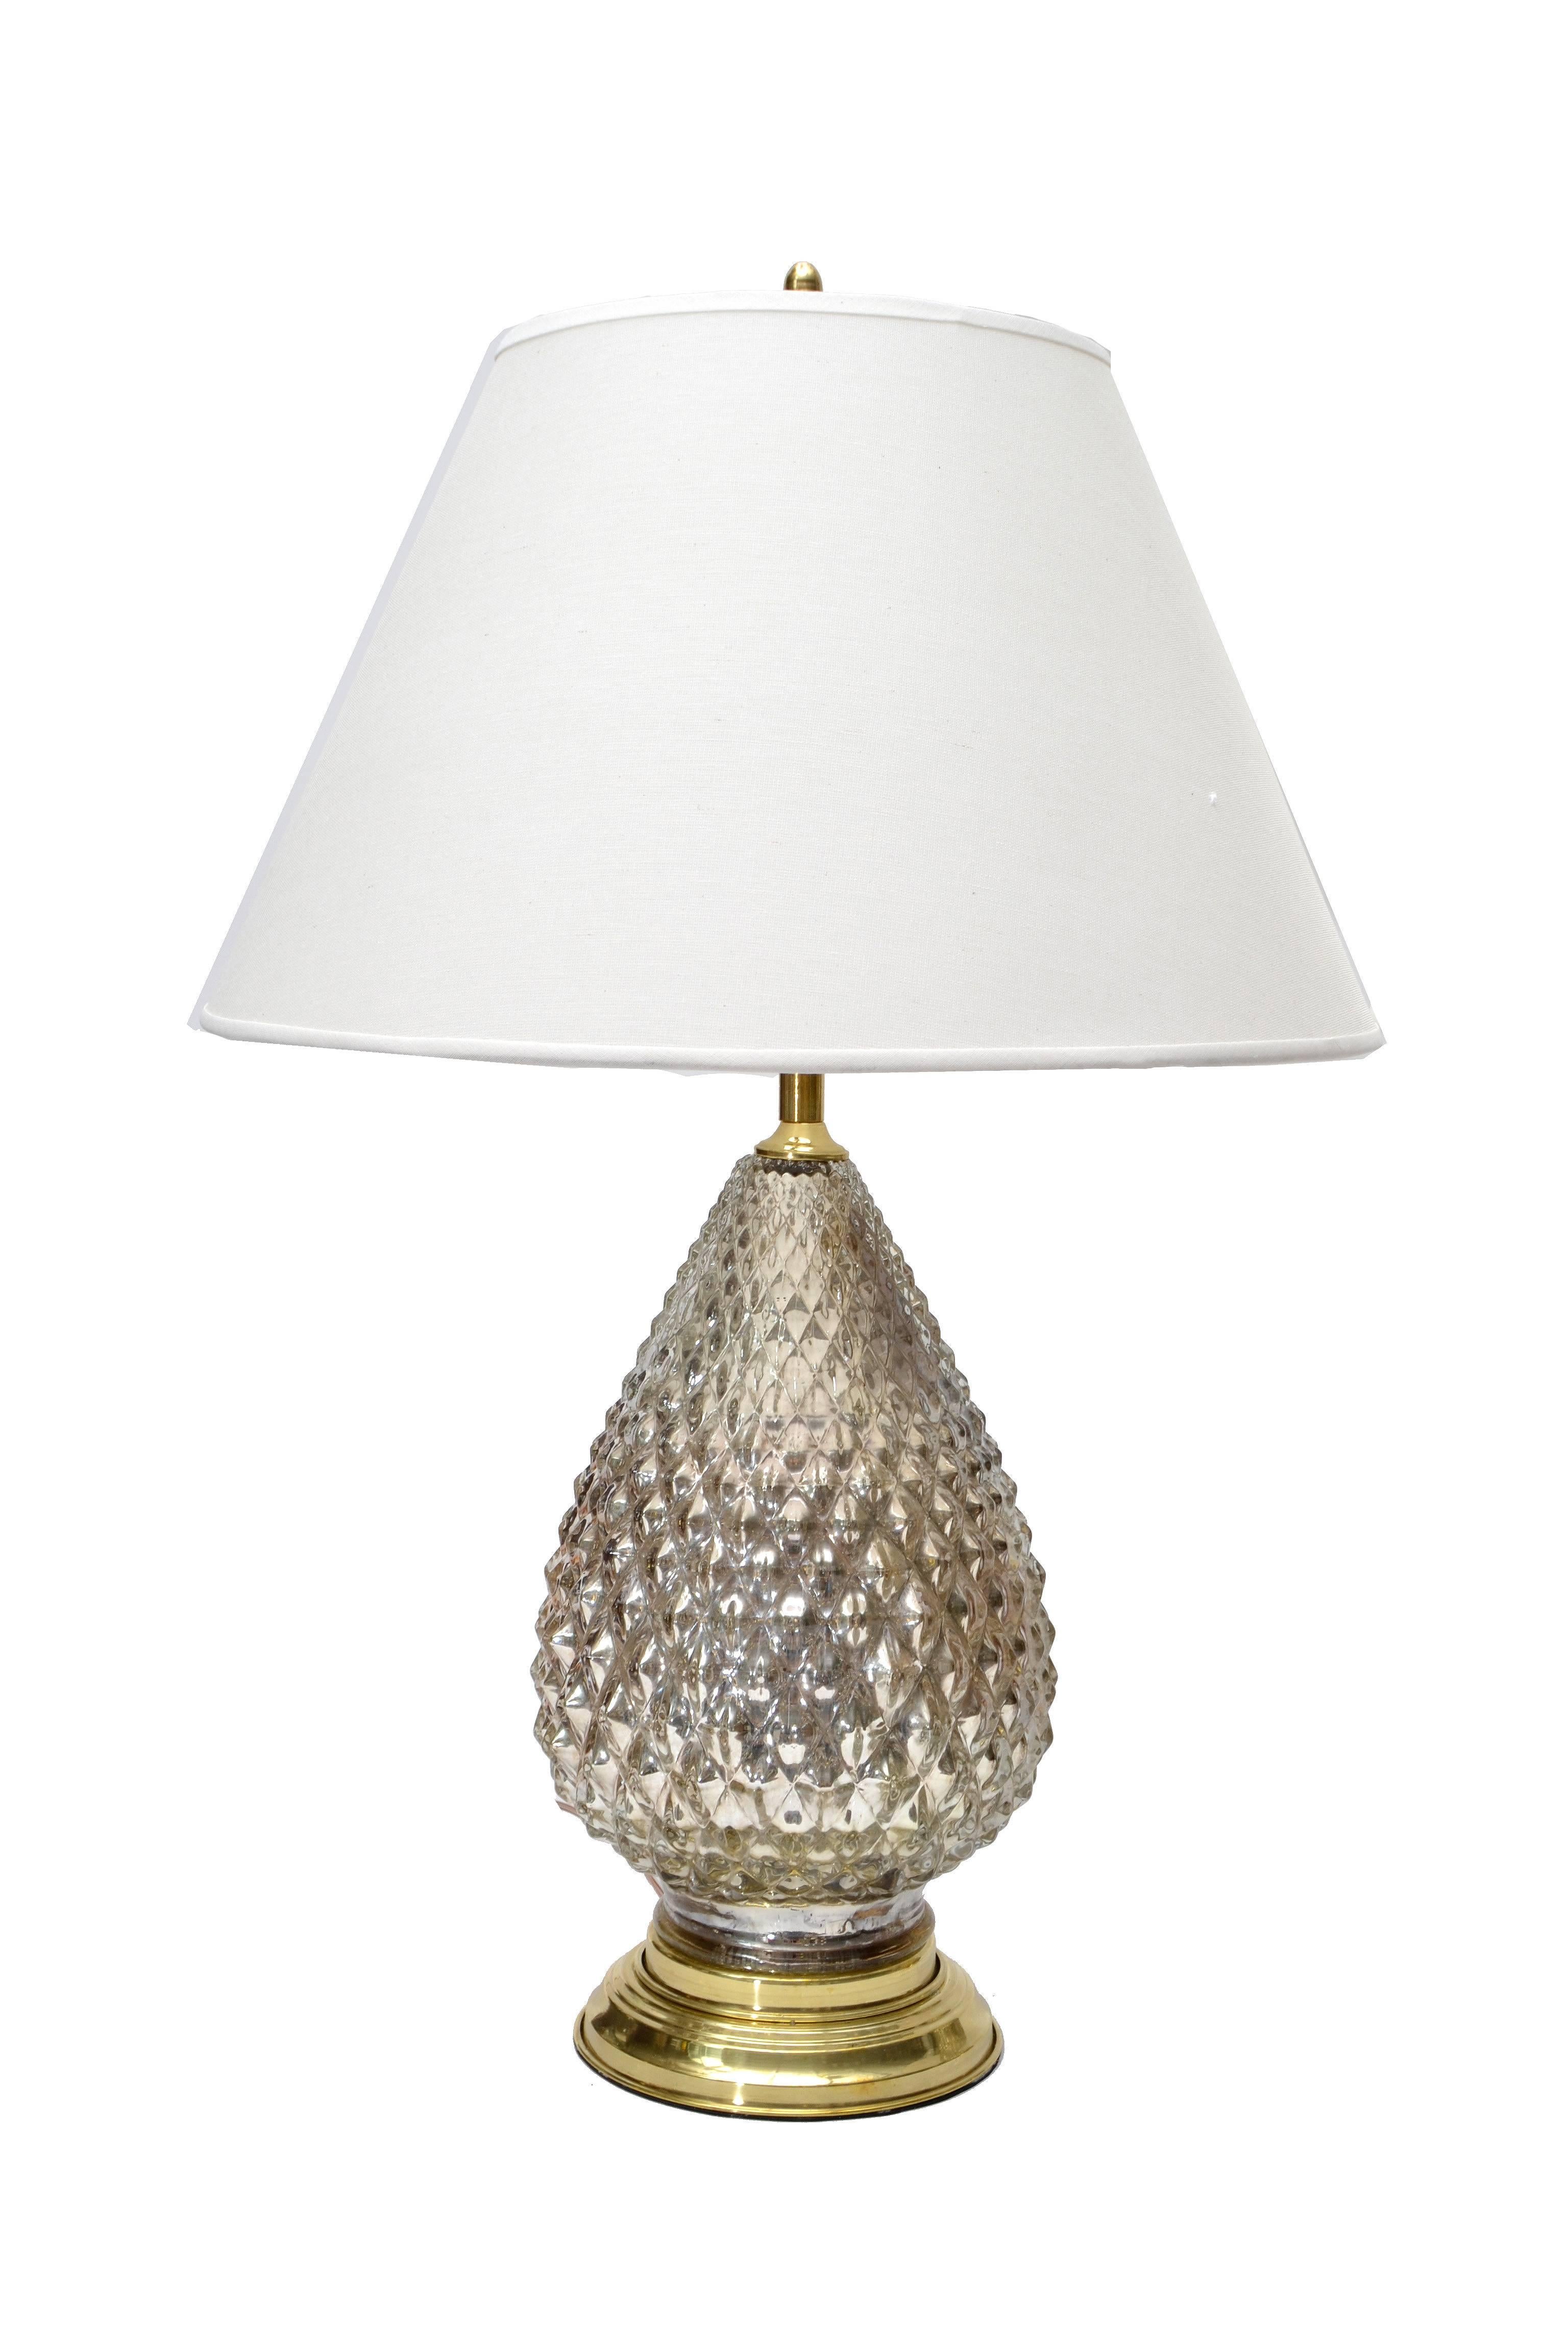 Pineapple pair of mercury glass lamps, with solid brass hardware. Double socketed and comes with Shades.
Each uses two regular 40 wattage light bulbs.
They come with a corded light switch.